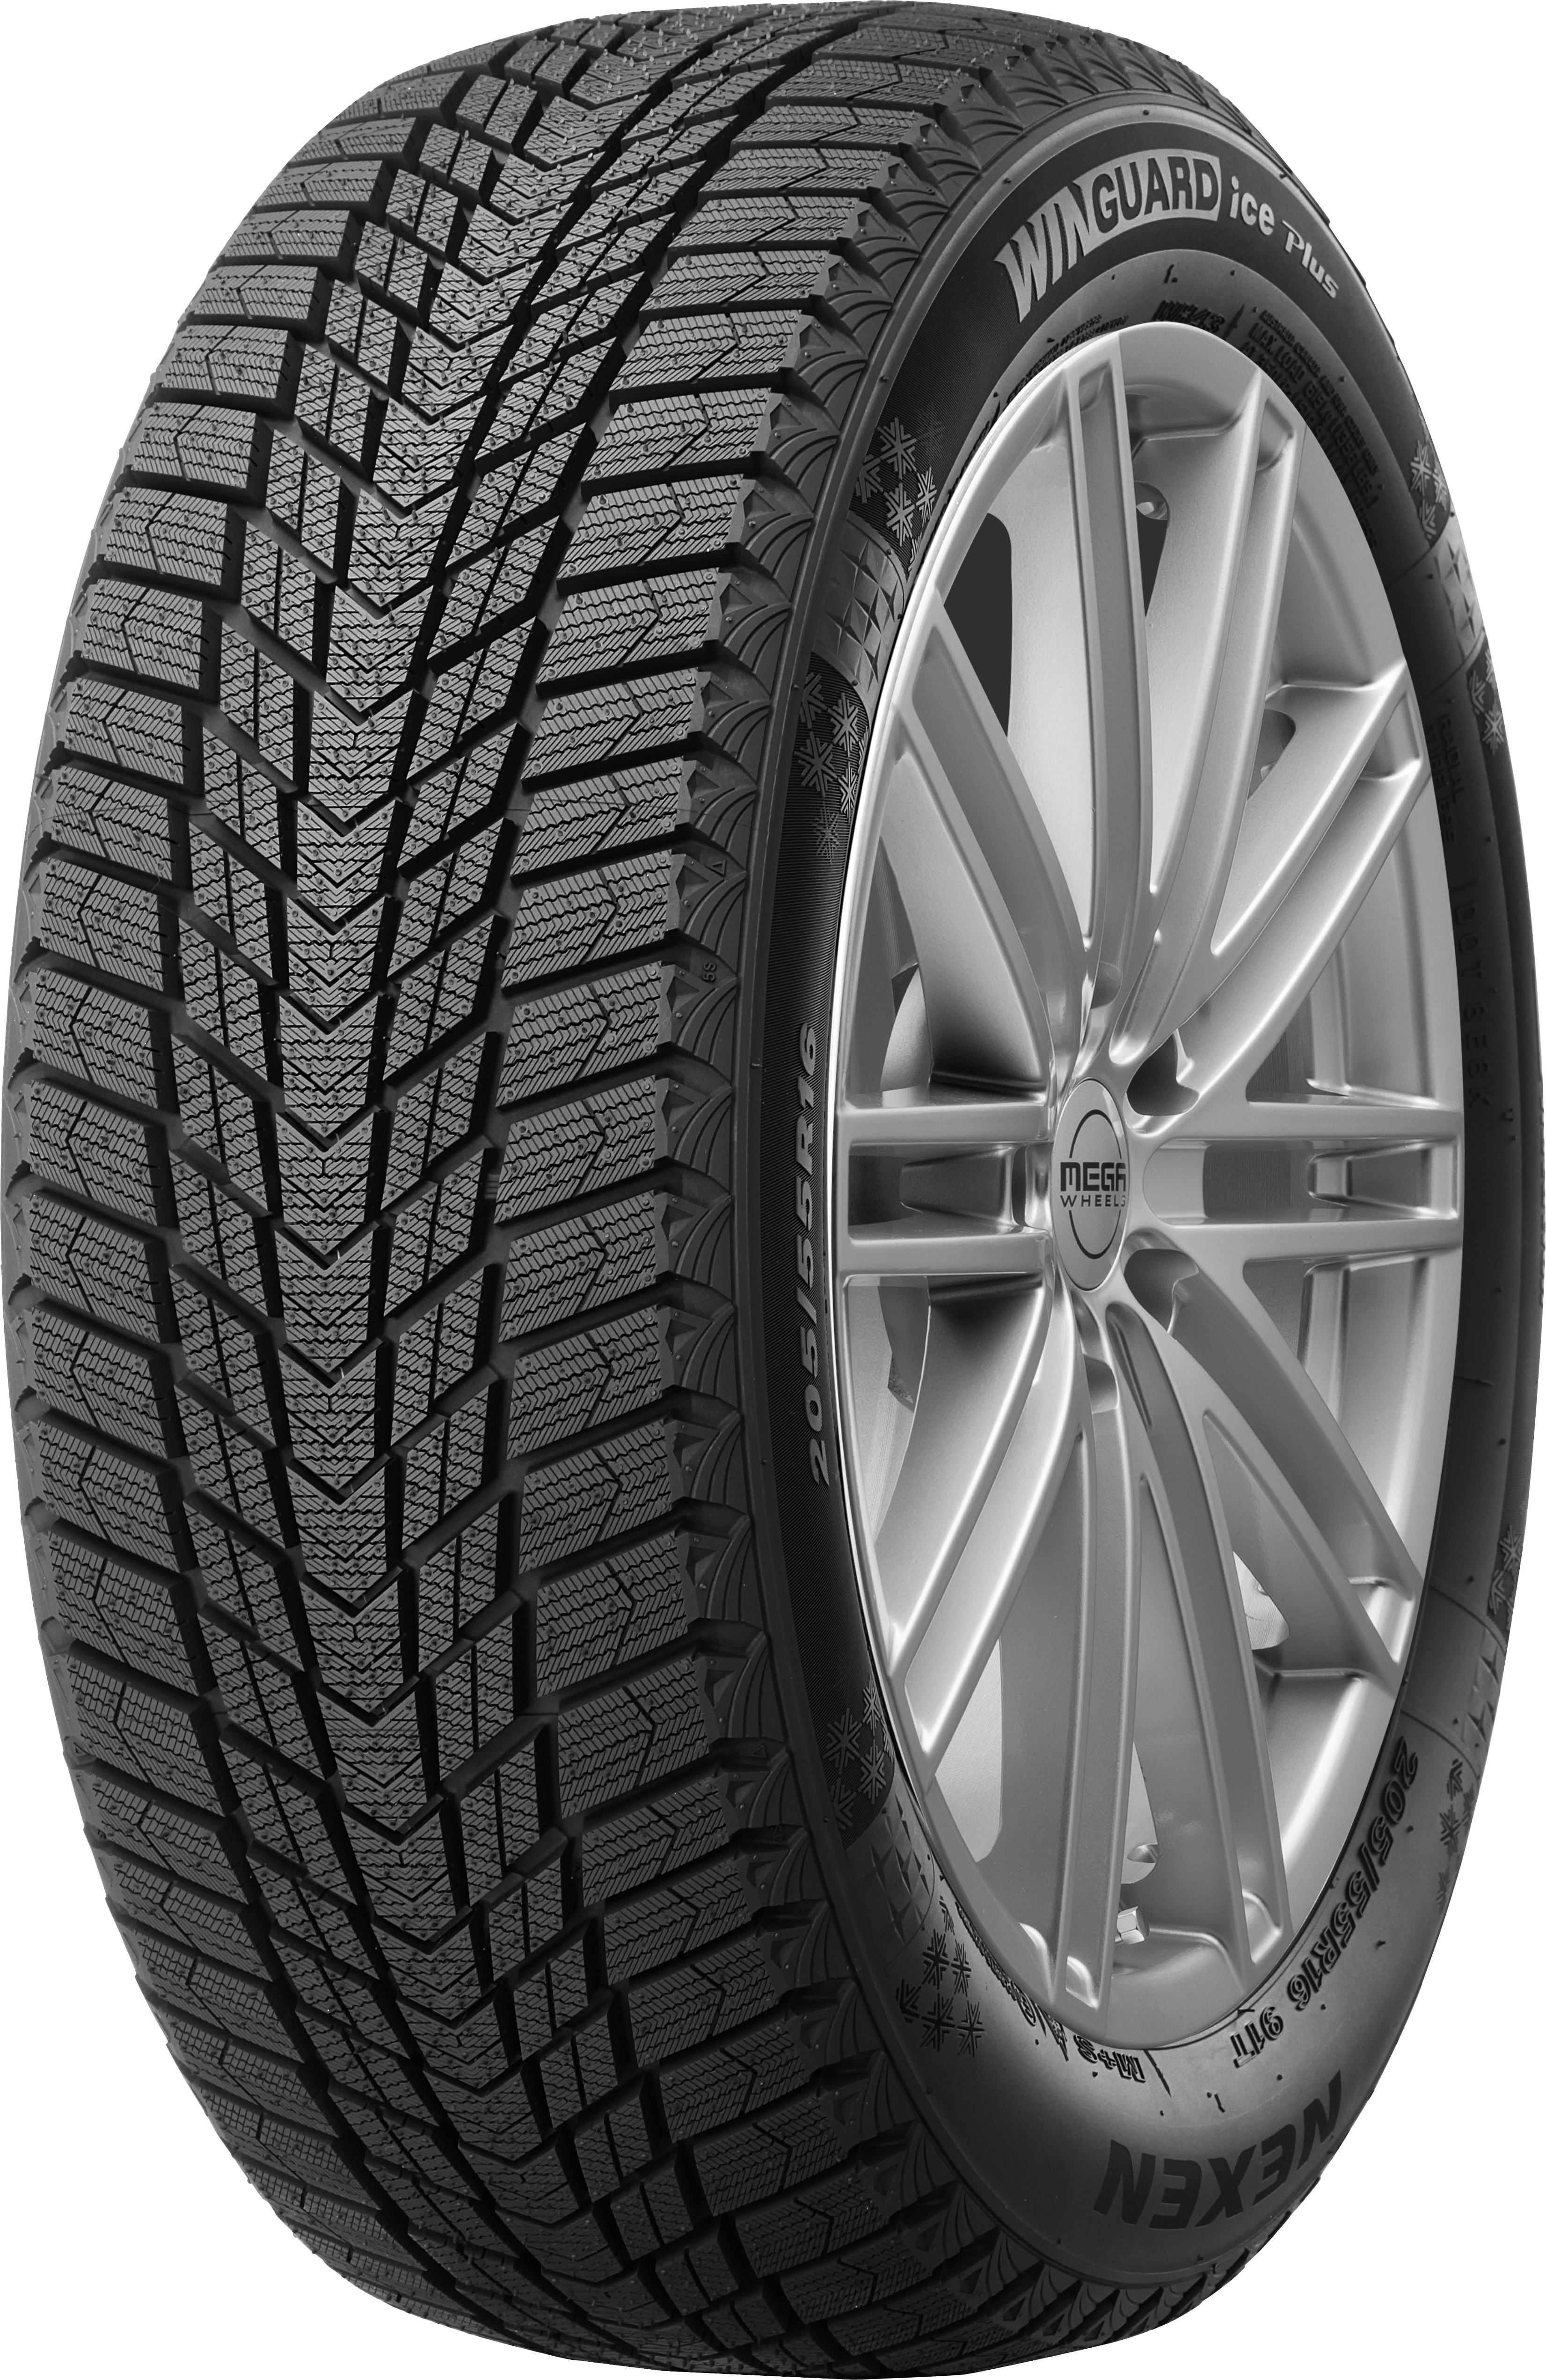 Nexen Winguard Ice Plus WH43 and - Reviews Tire Tests